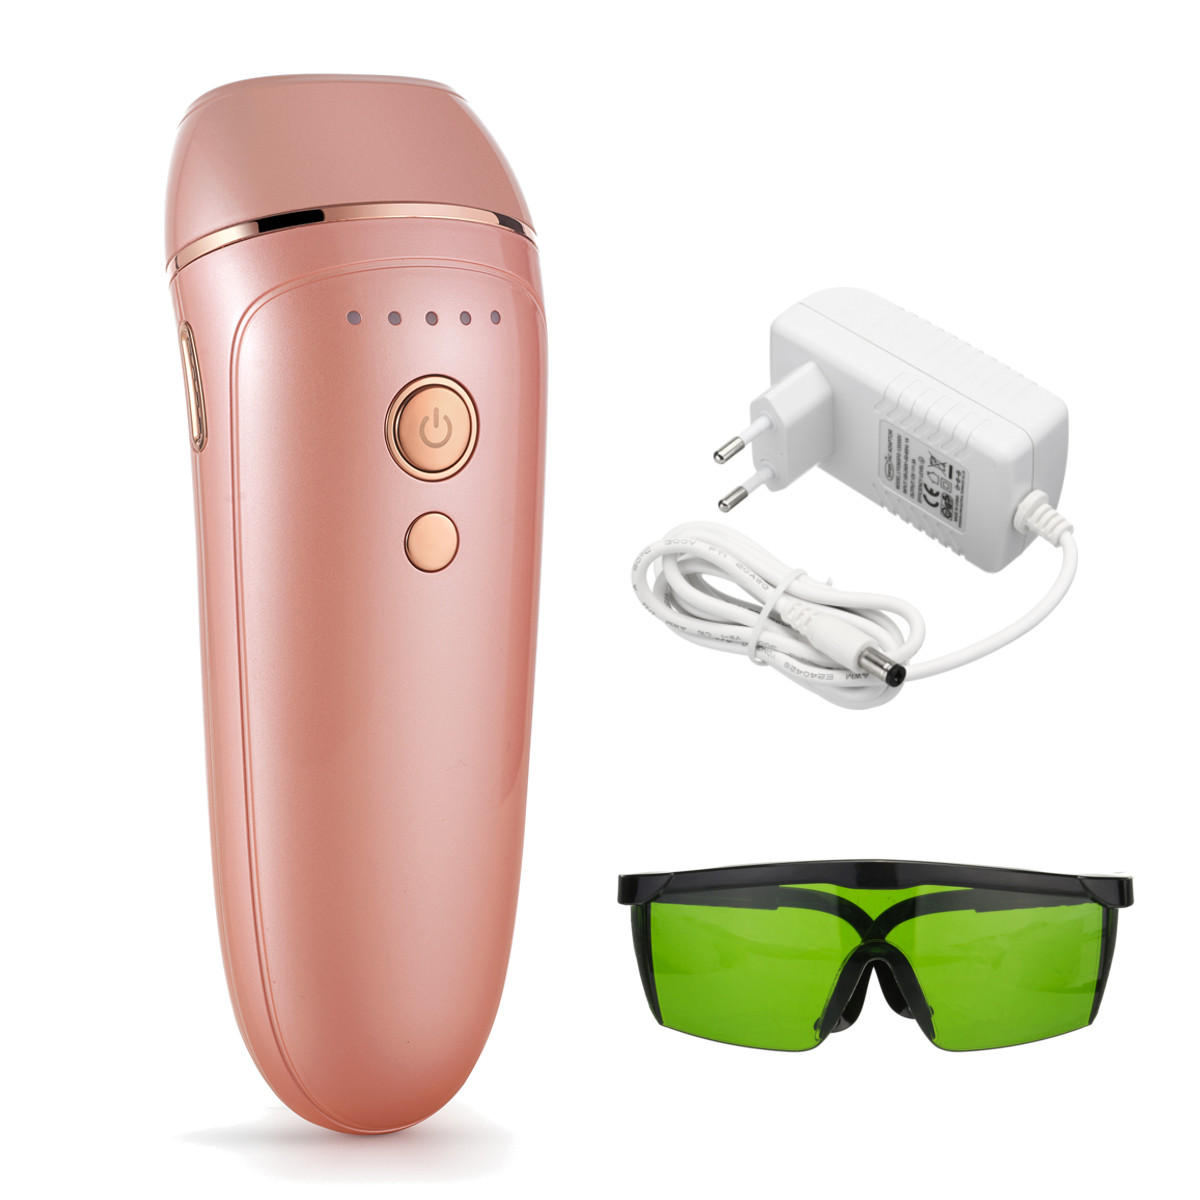 600000 flashes laser ipl permanent hair removal machine painless